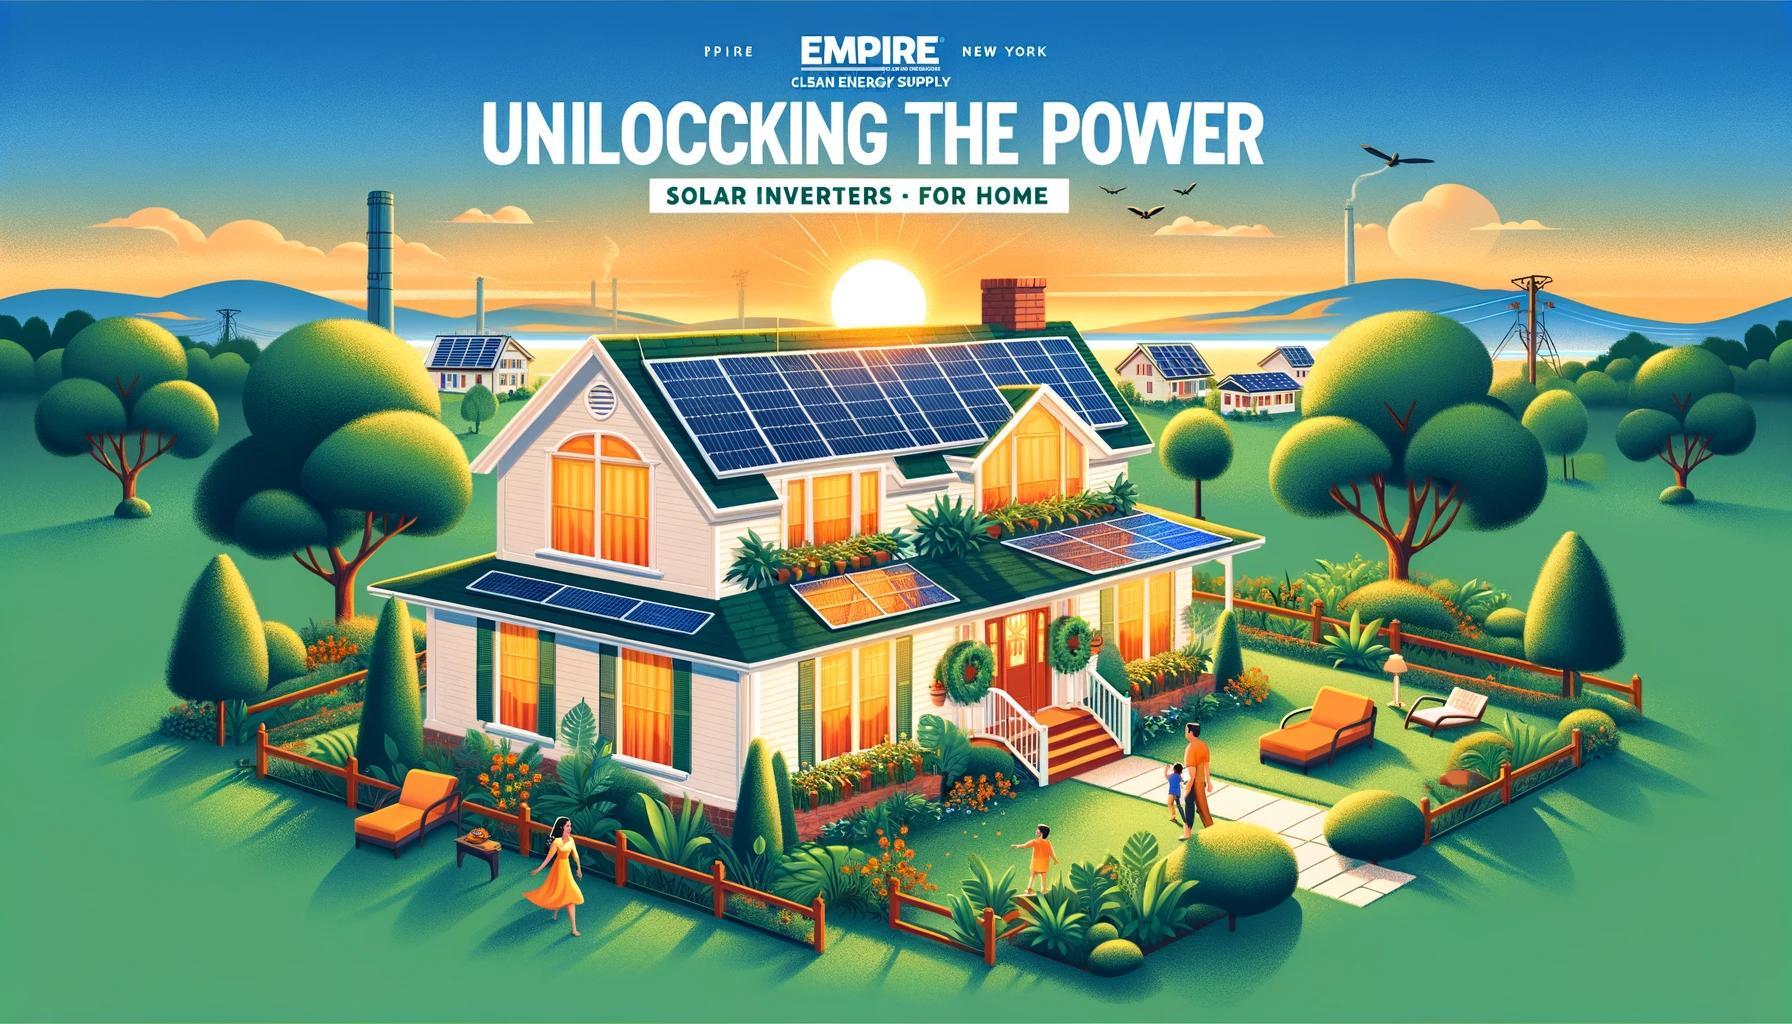 Unlocking the Power: Solar Inverters for Home in East Northport, New York Illuminate the Path to Sustainable Energy Independence